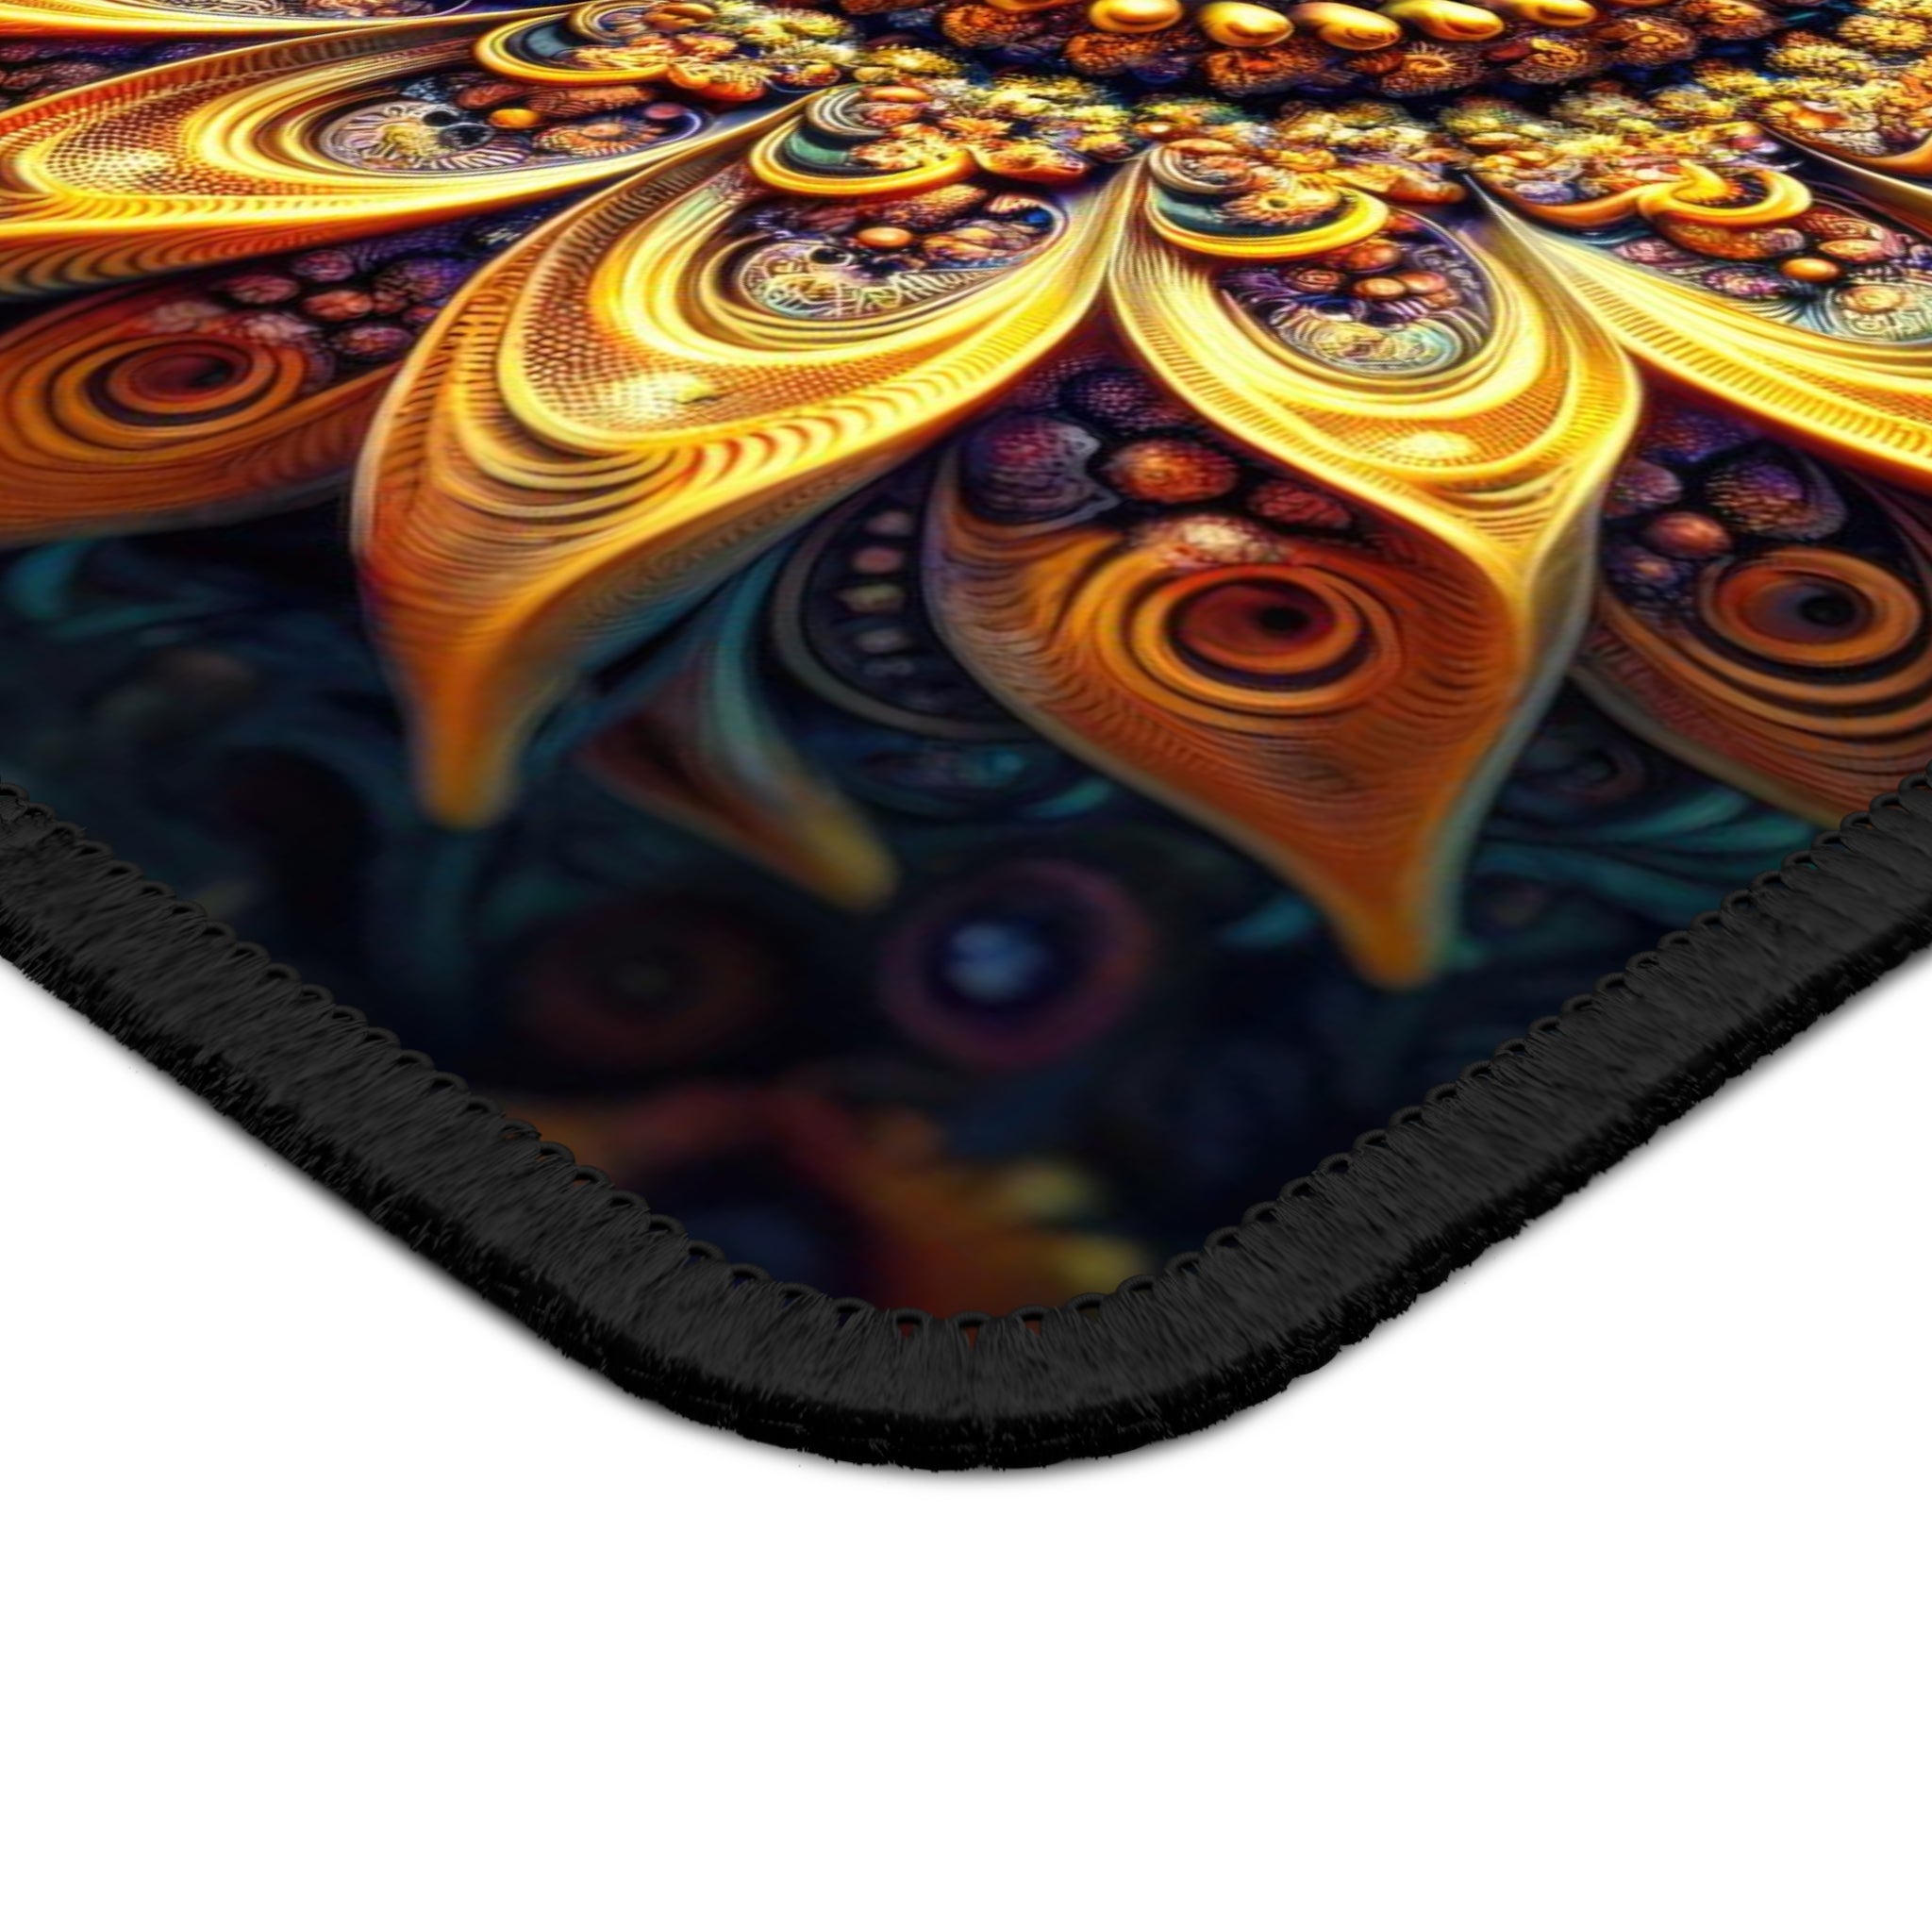 Infinite Fractal Fields Gaming Mouse Pad